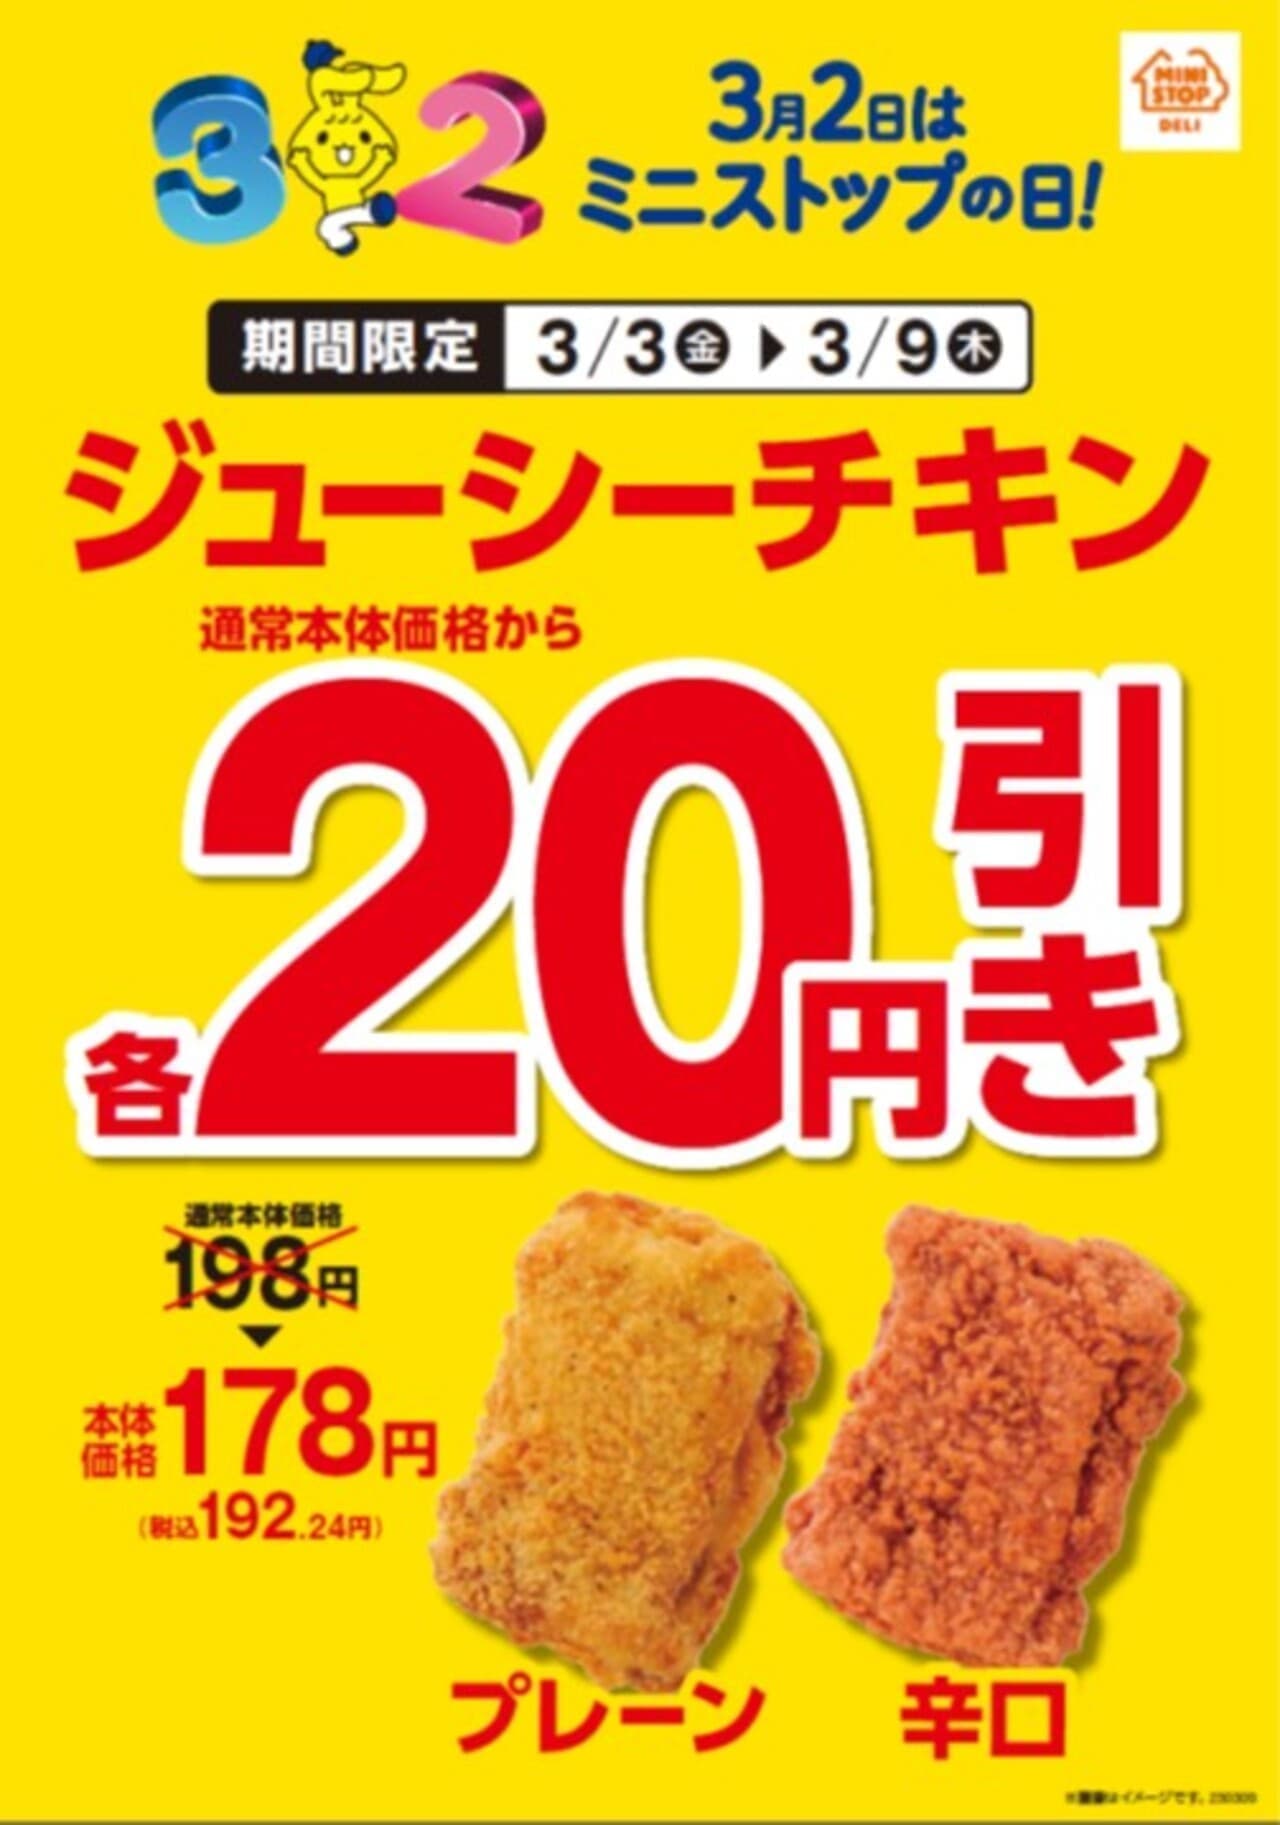 Ministop "20 yen off each of two chouxsie chicken products".